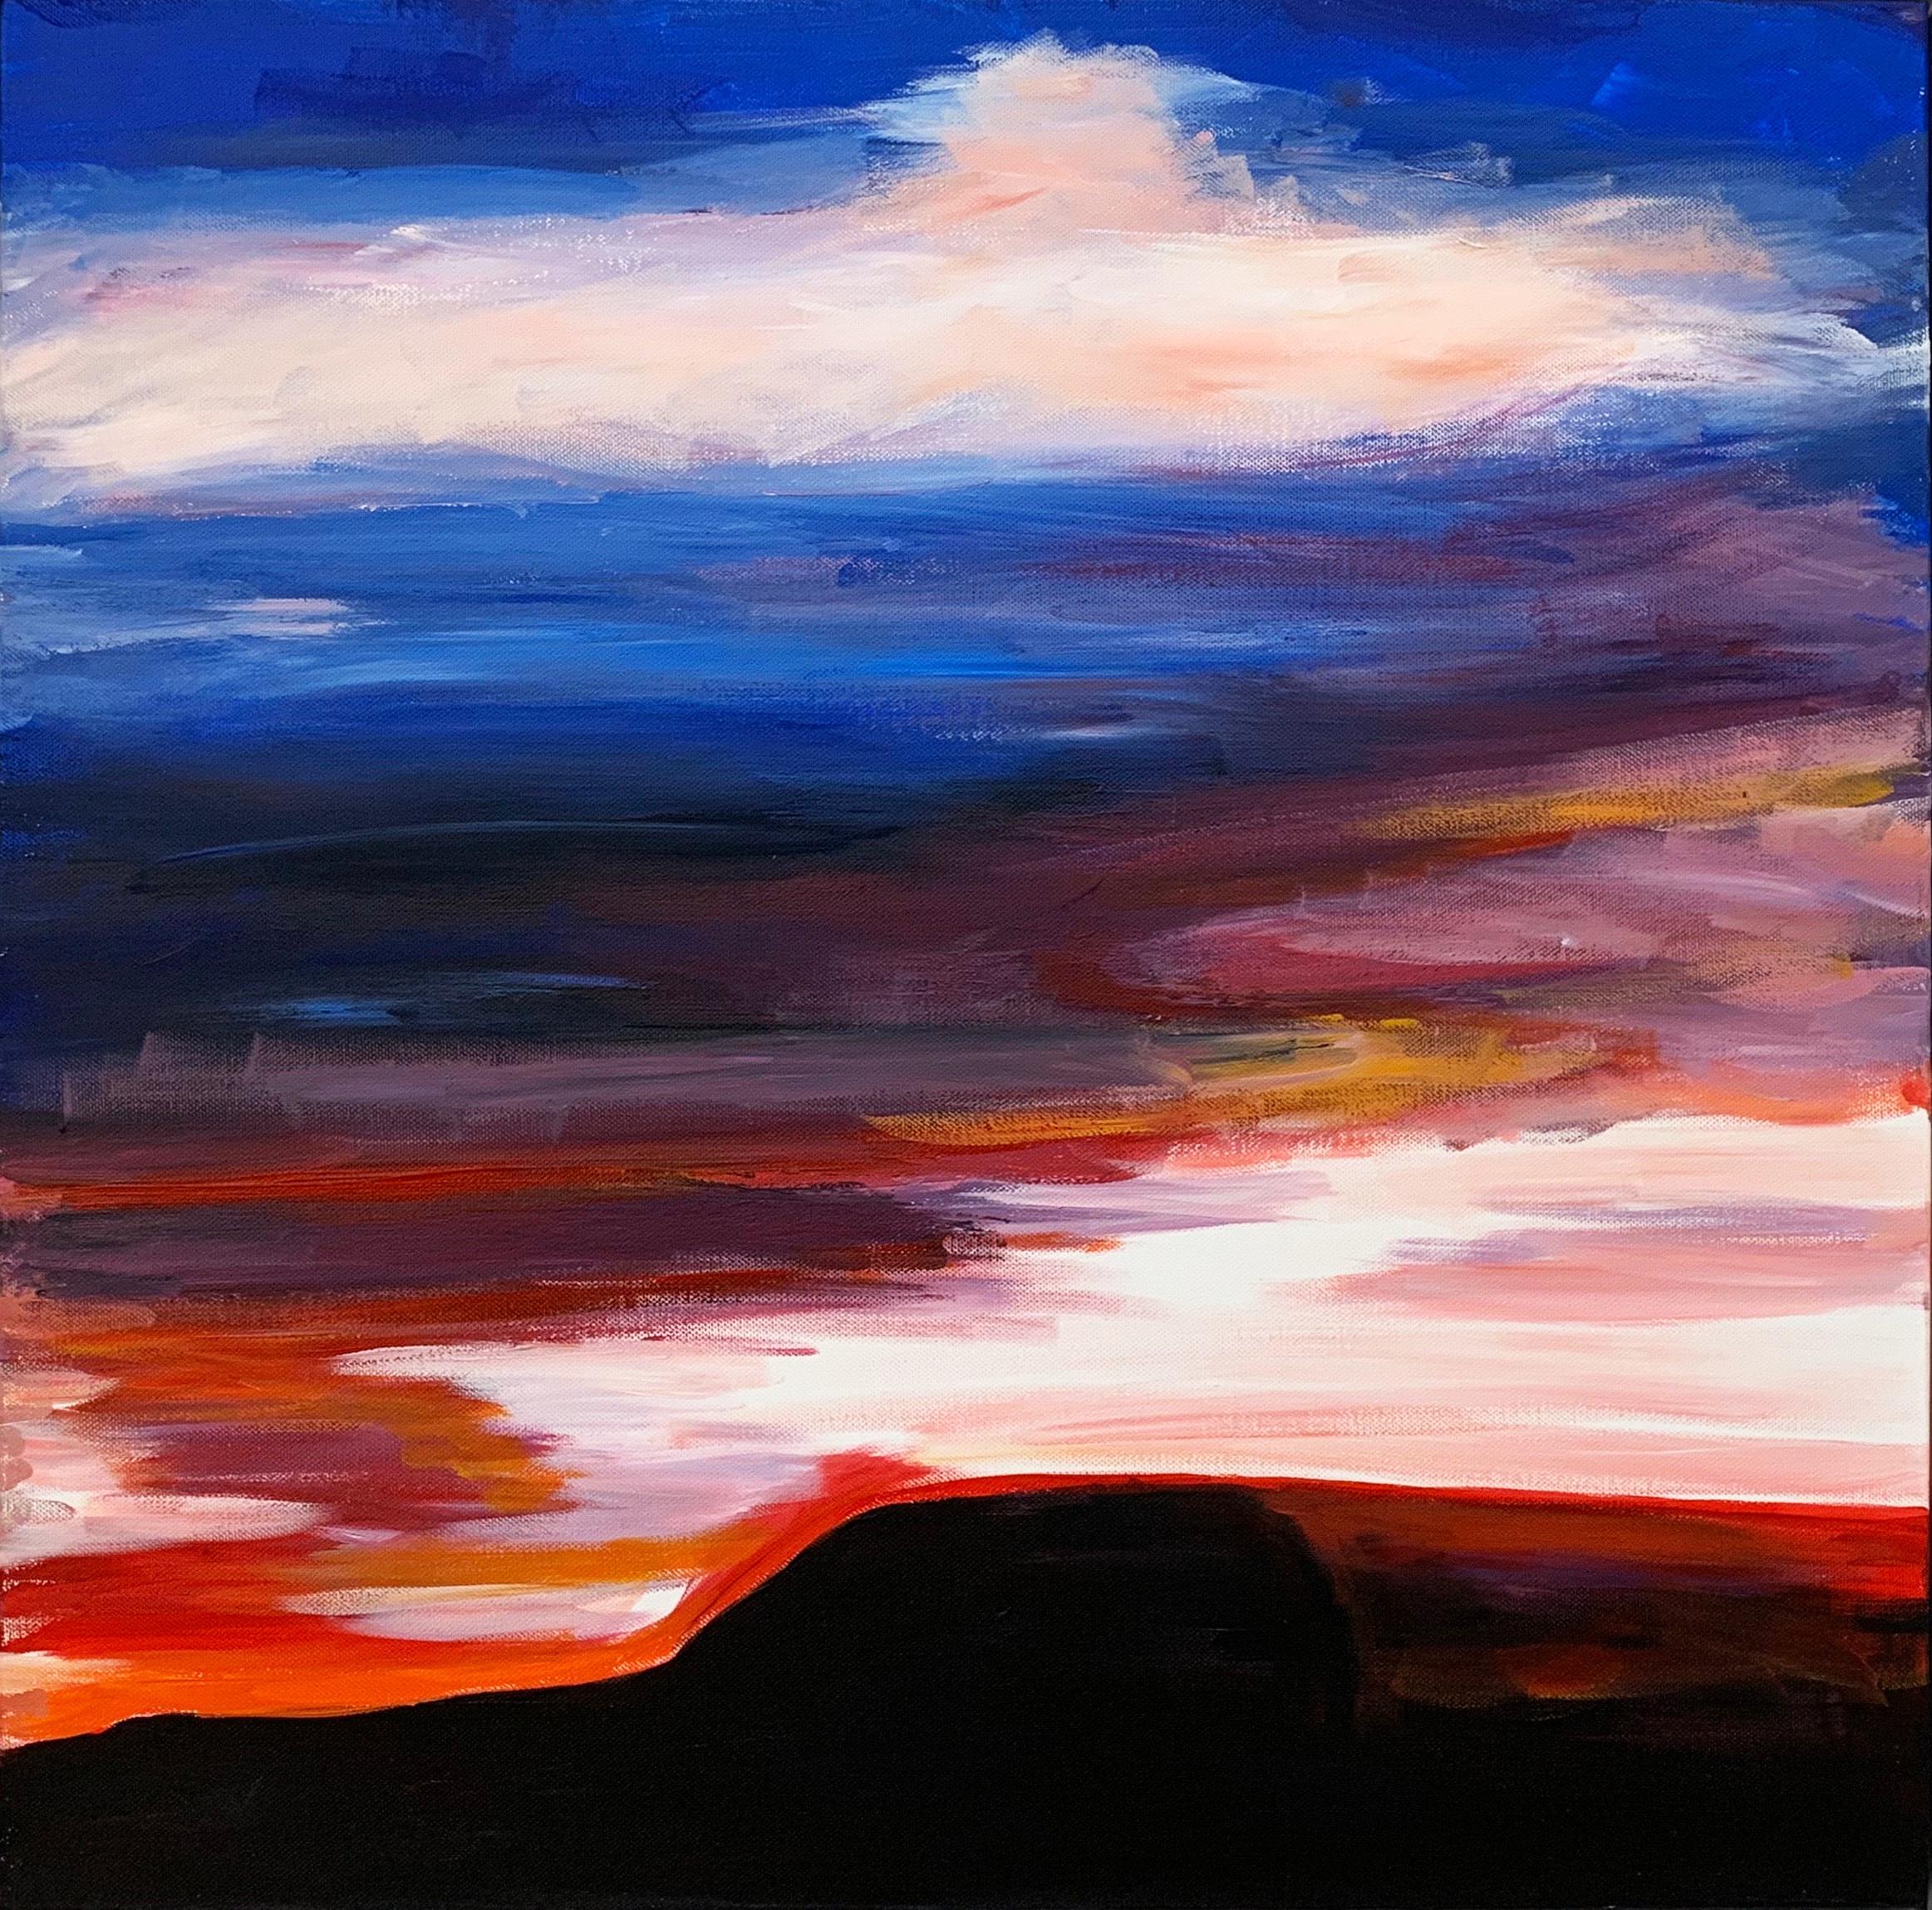 Colourful Abstract Landscape & Sky Painting with Reds, Purples & Blues of Pendle Hill in the Northern English Countryside by leading British Urban Artist Angela Wakefield.

Art measures 24 x 24 inches
Frame measures 30 x 30 inches

This artwork is